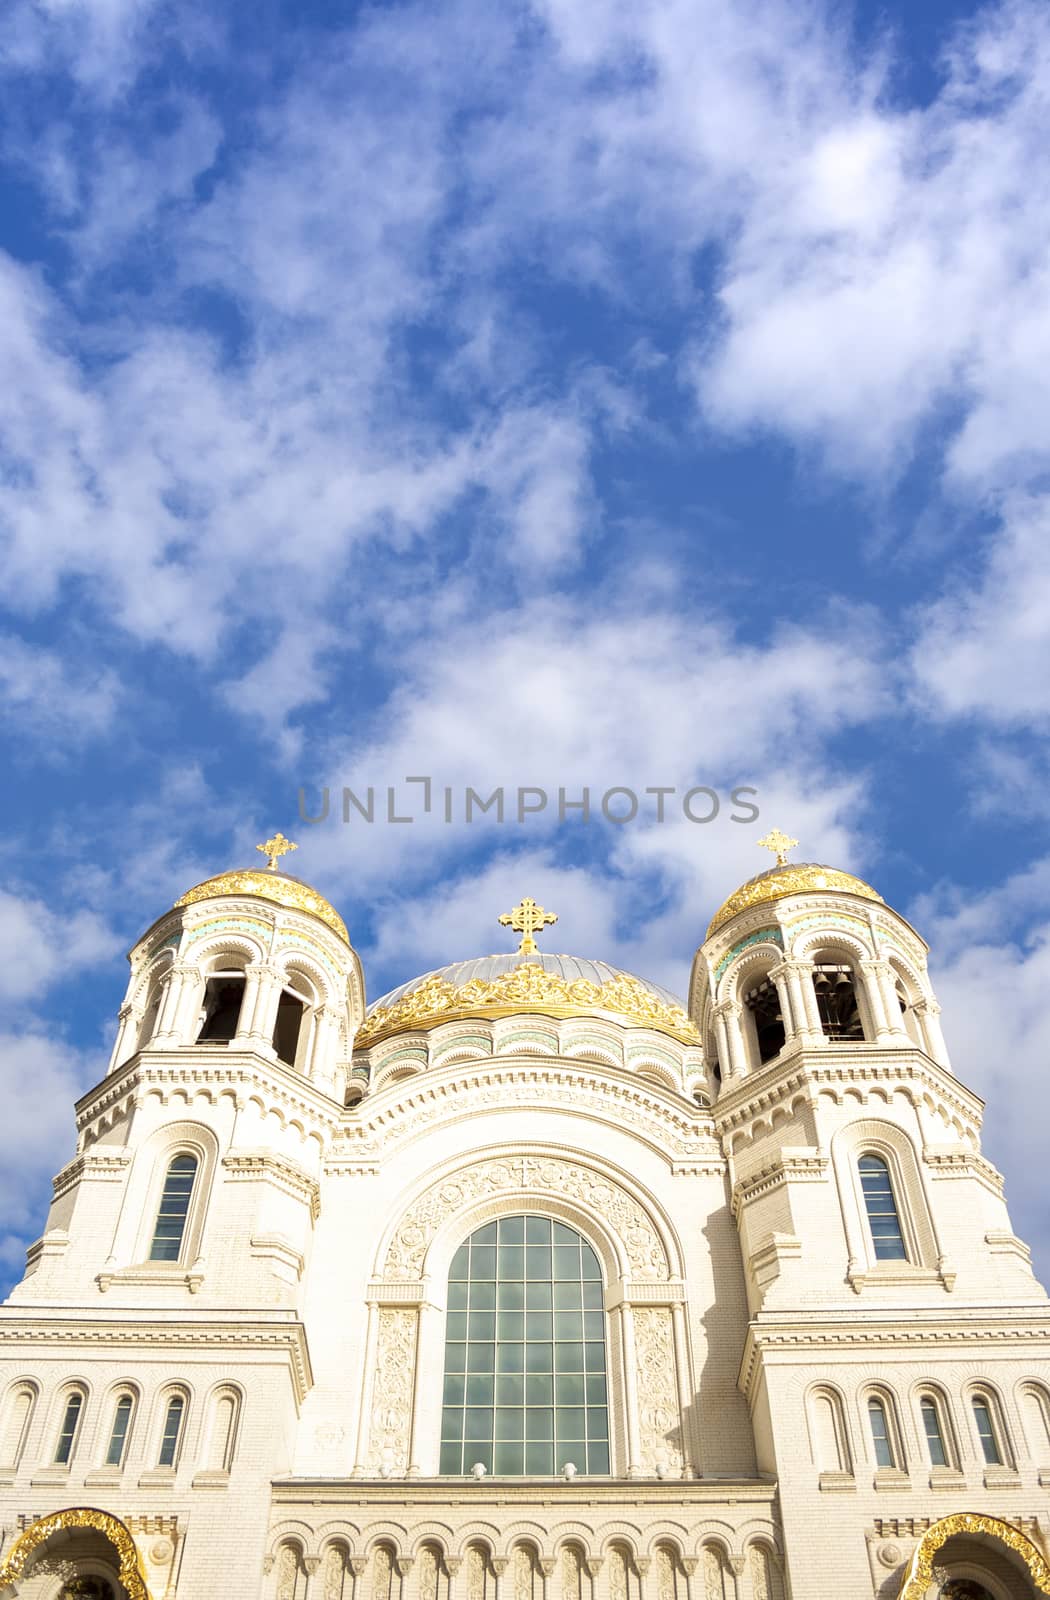 Nicholas the wonderworker's church on Anchor square in kronstadt town Saint Petersburg. Naval christian cathedral church in russia with golden dome, unesco architecture at sunny day vertical